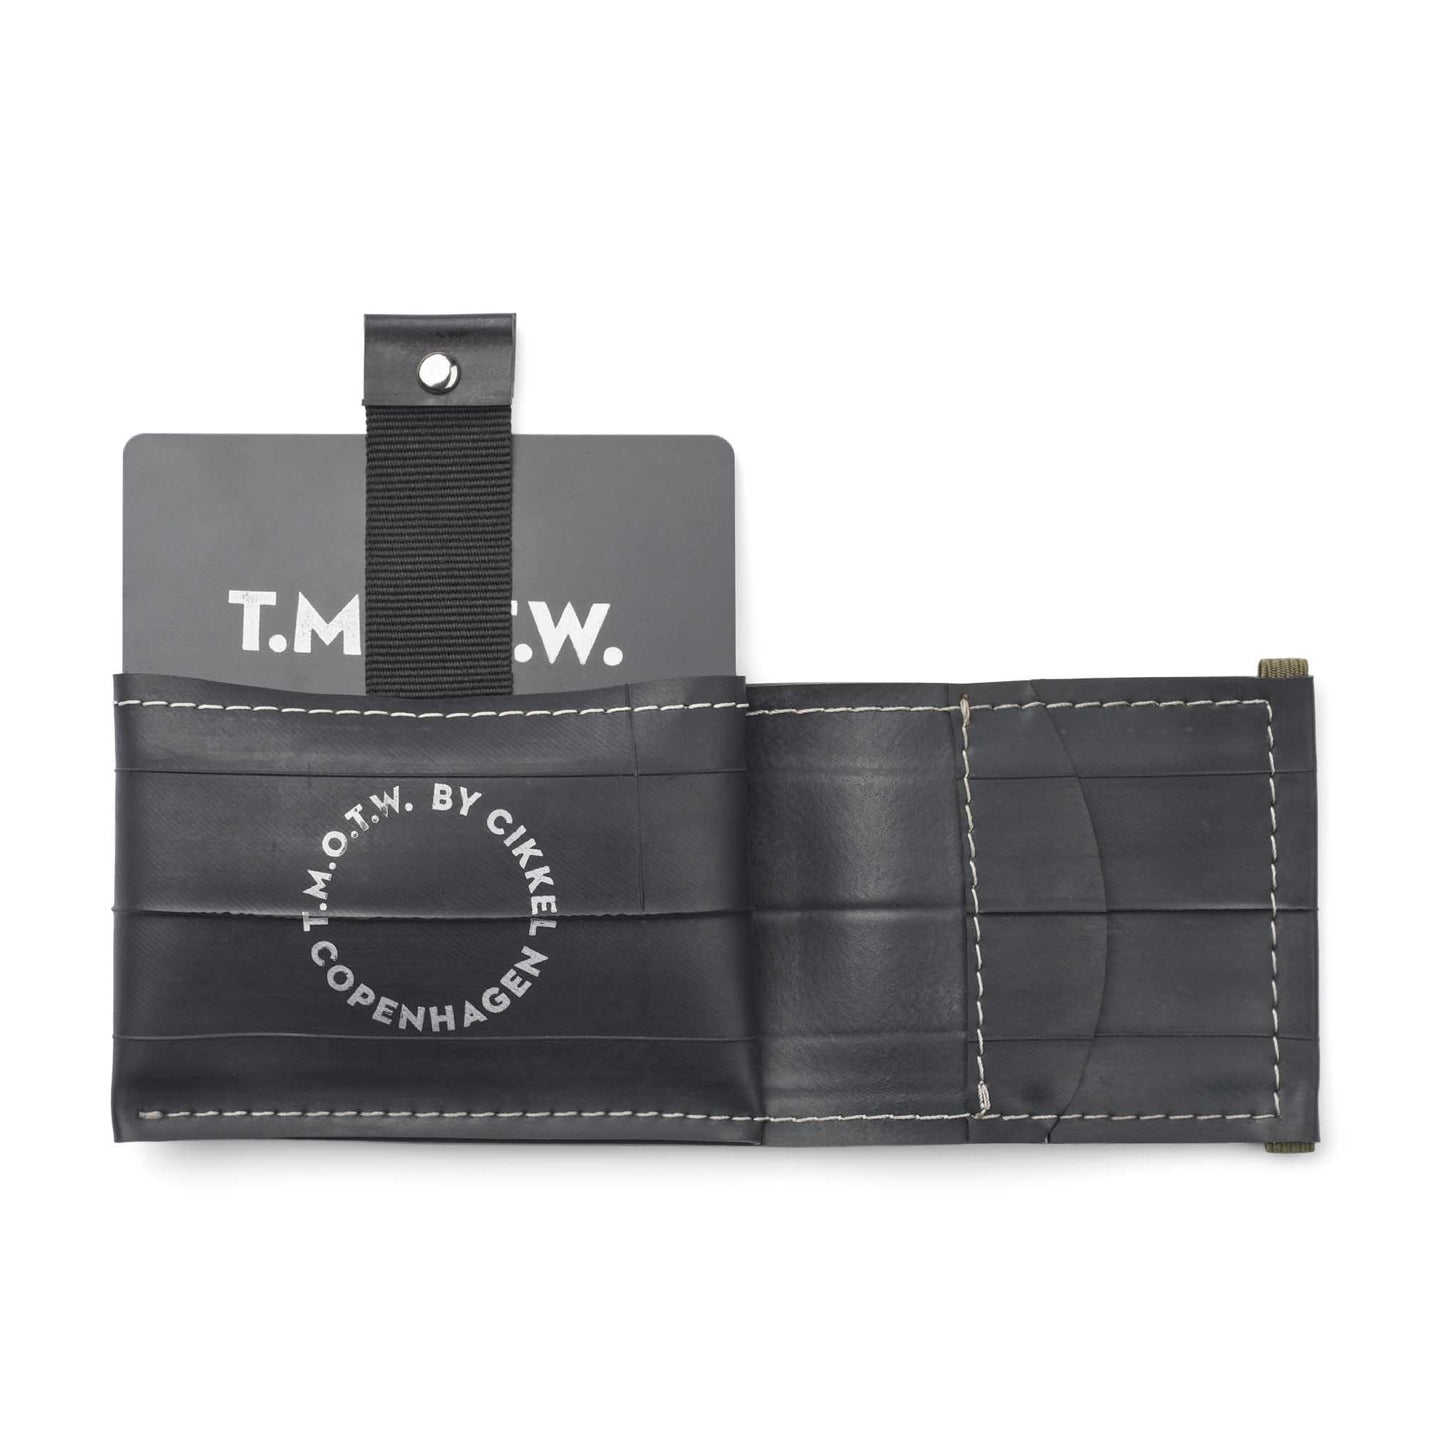 Upcycled Wallet T.M.O.T.W. x K.W.D.